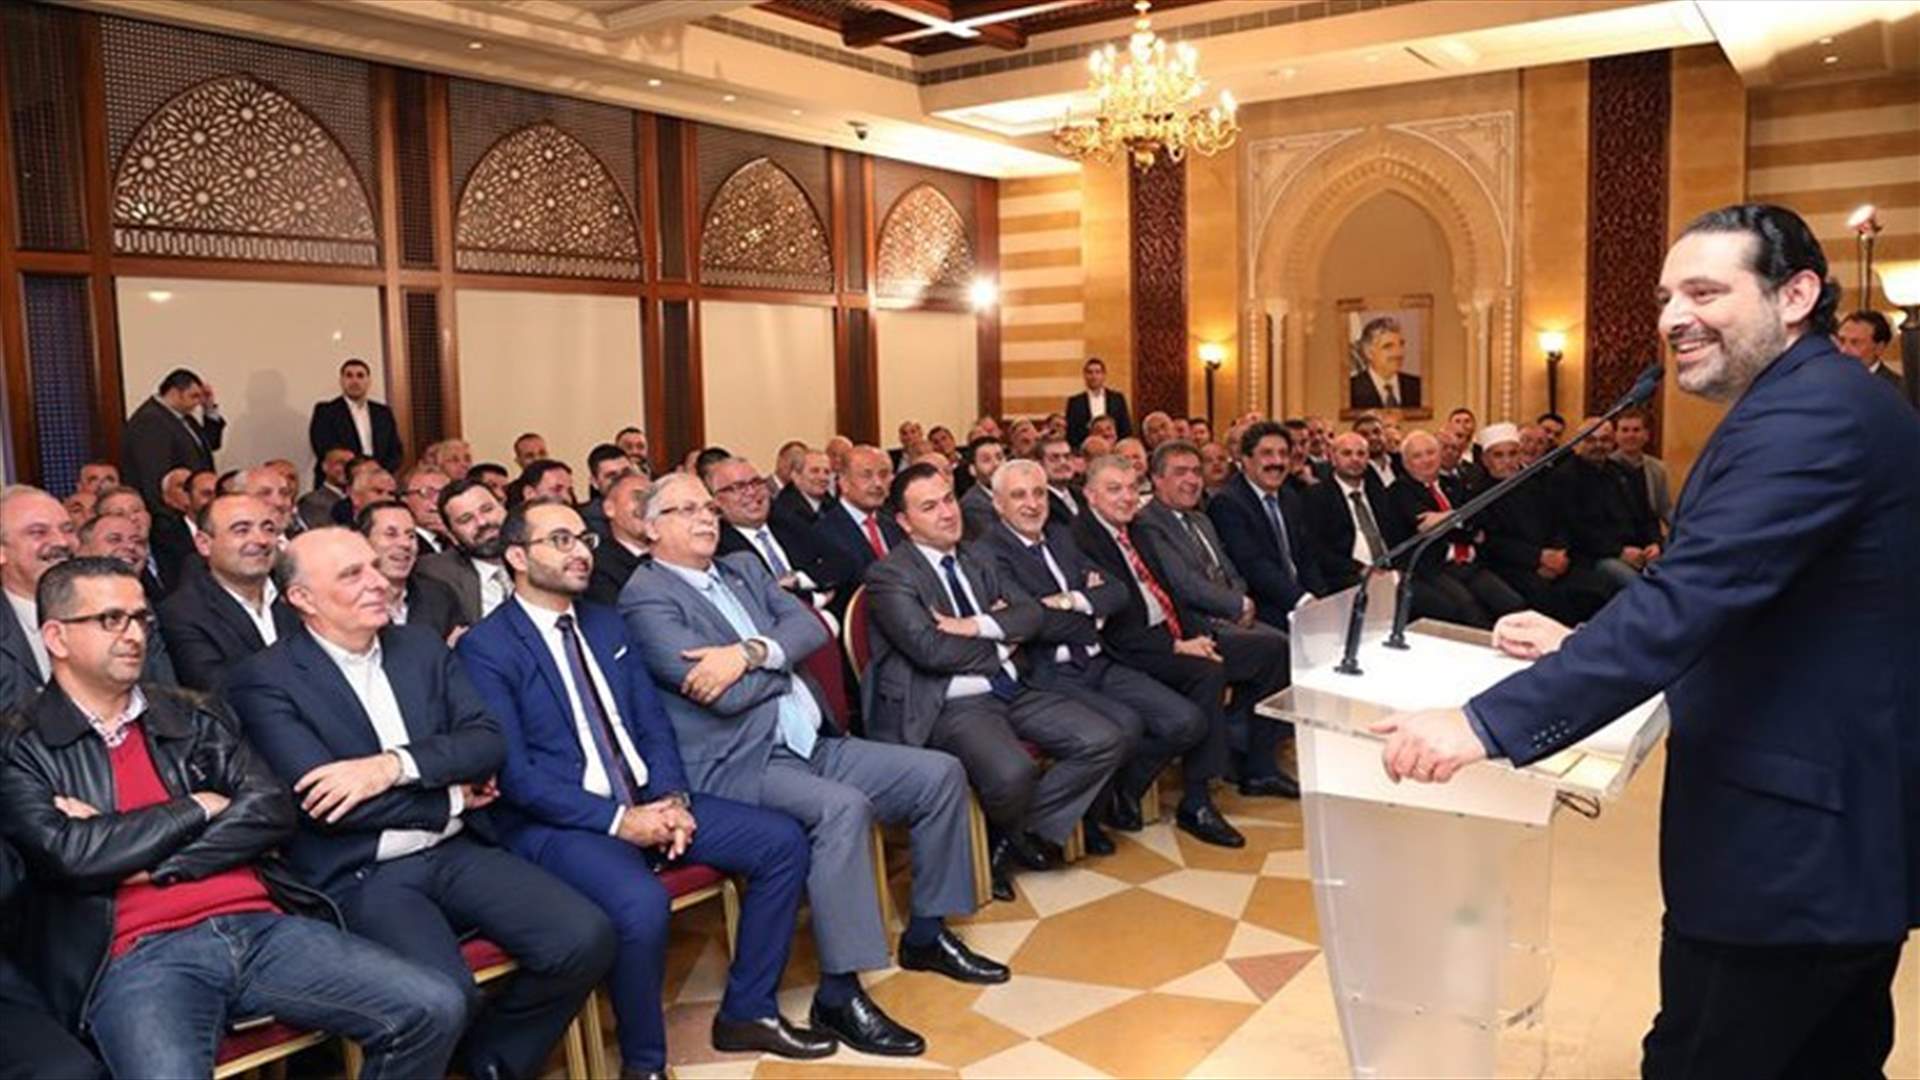 PM Hariri: I will personally follow up on implementation of dissociation policy